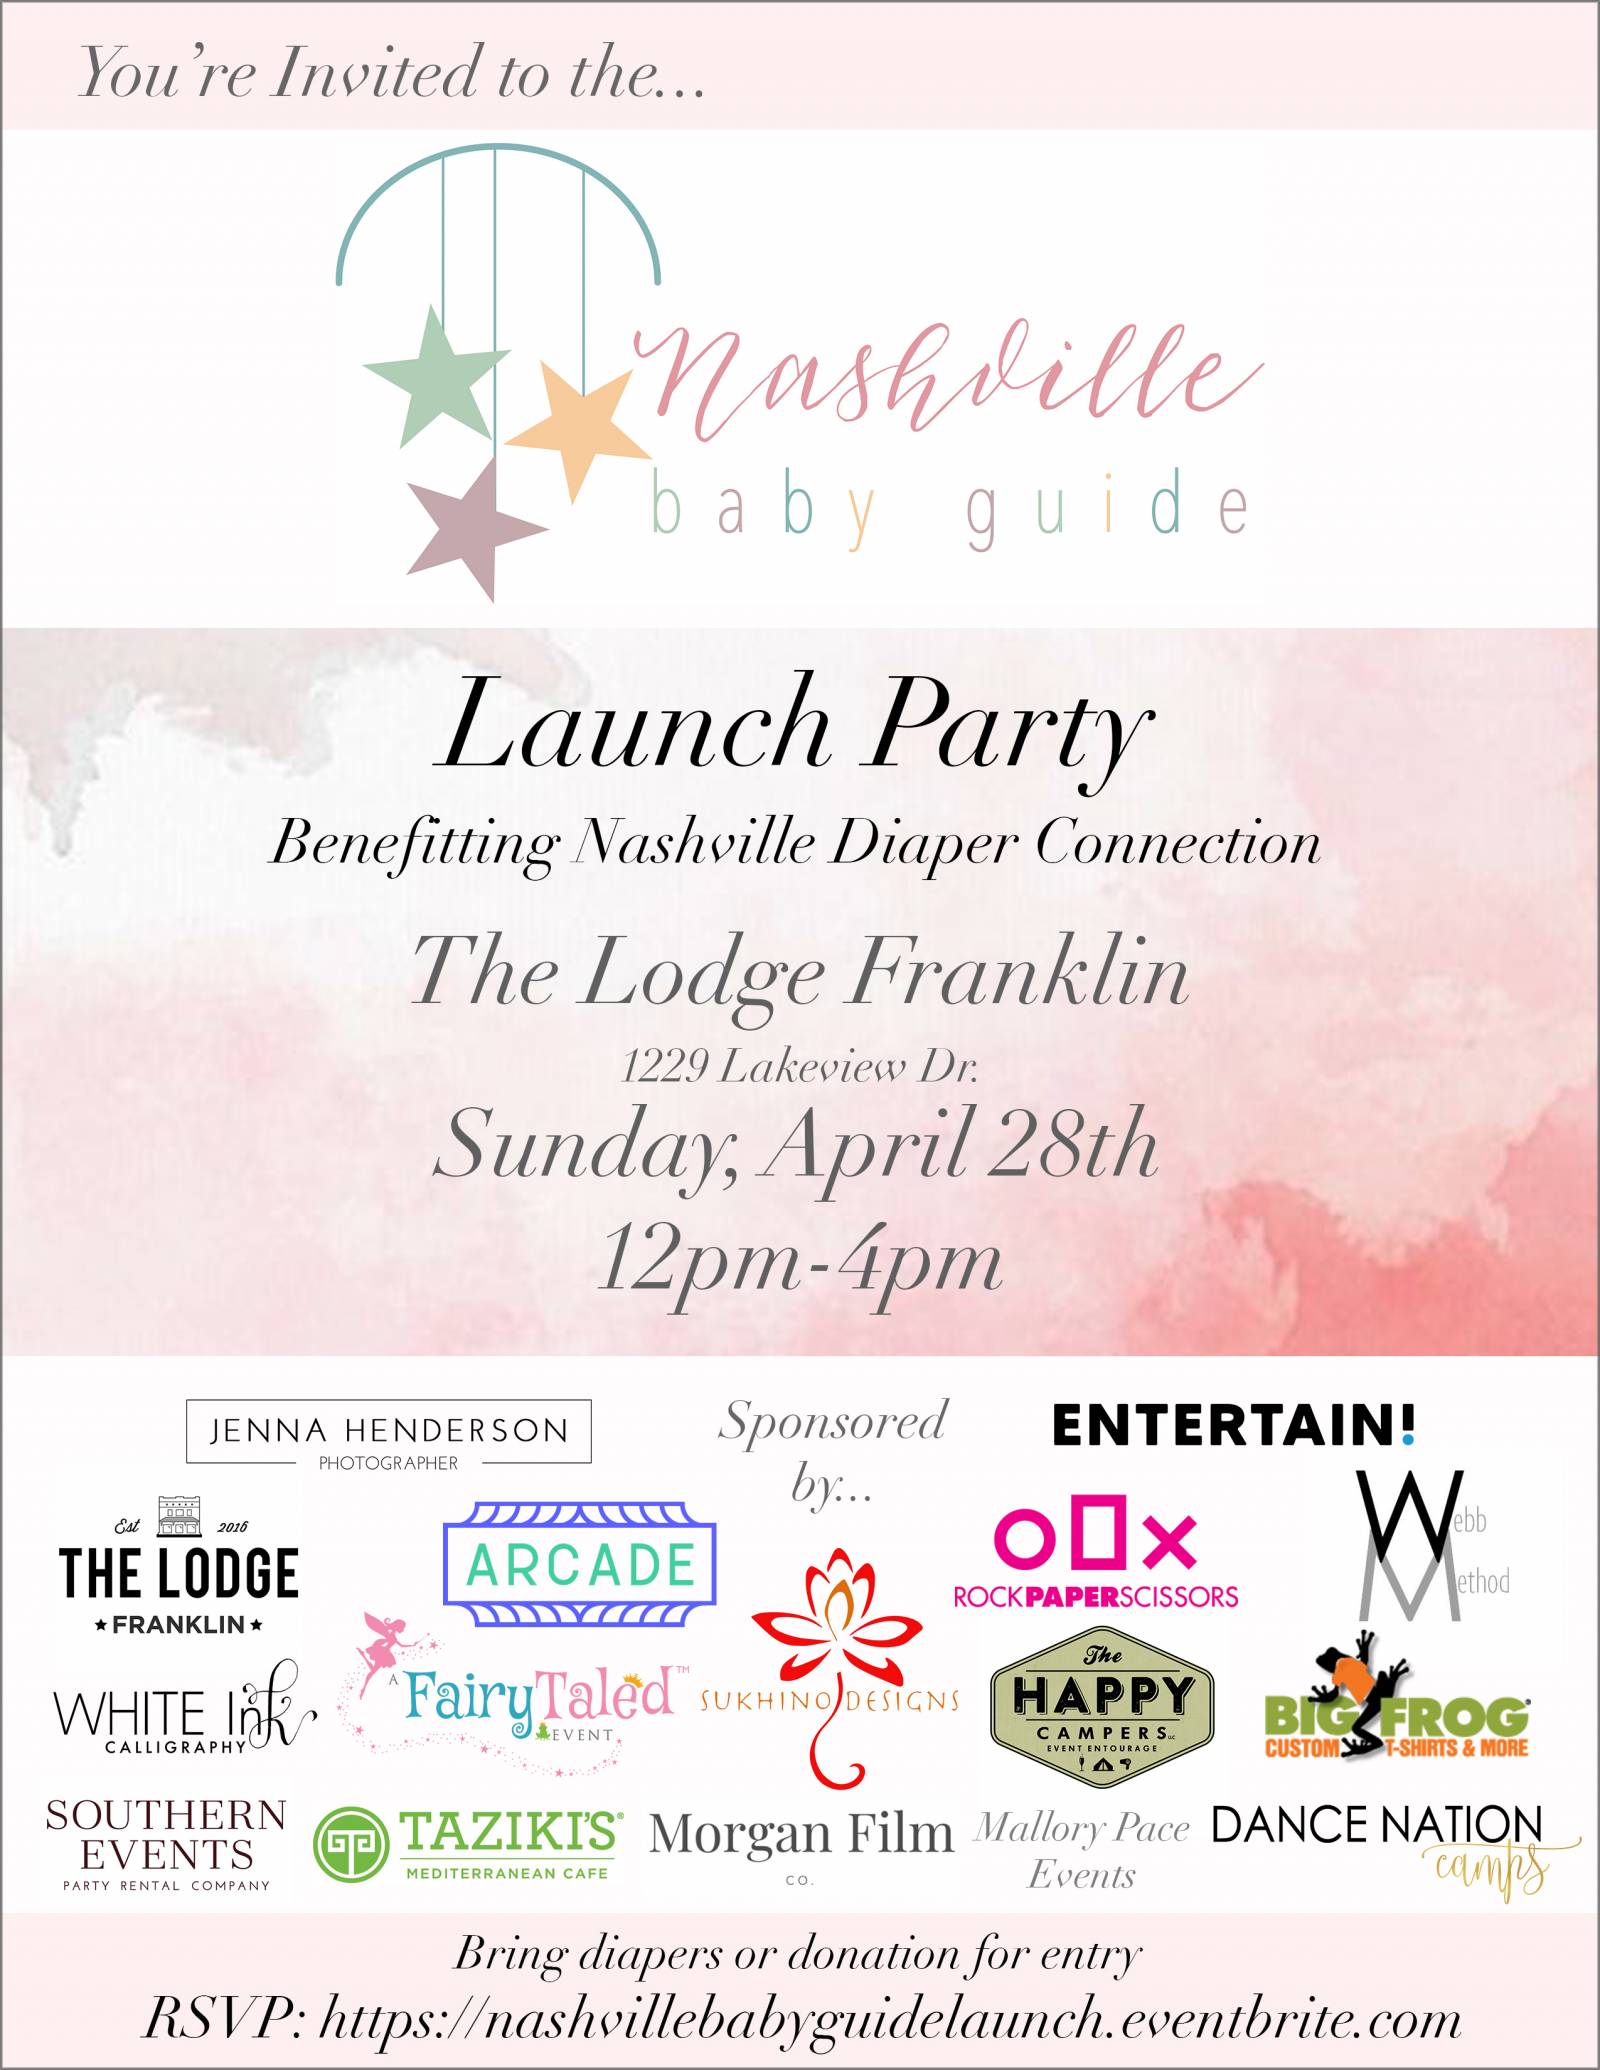 Come Out To The Nashville Baby Guide Launch Party on Sunday!